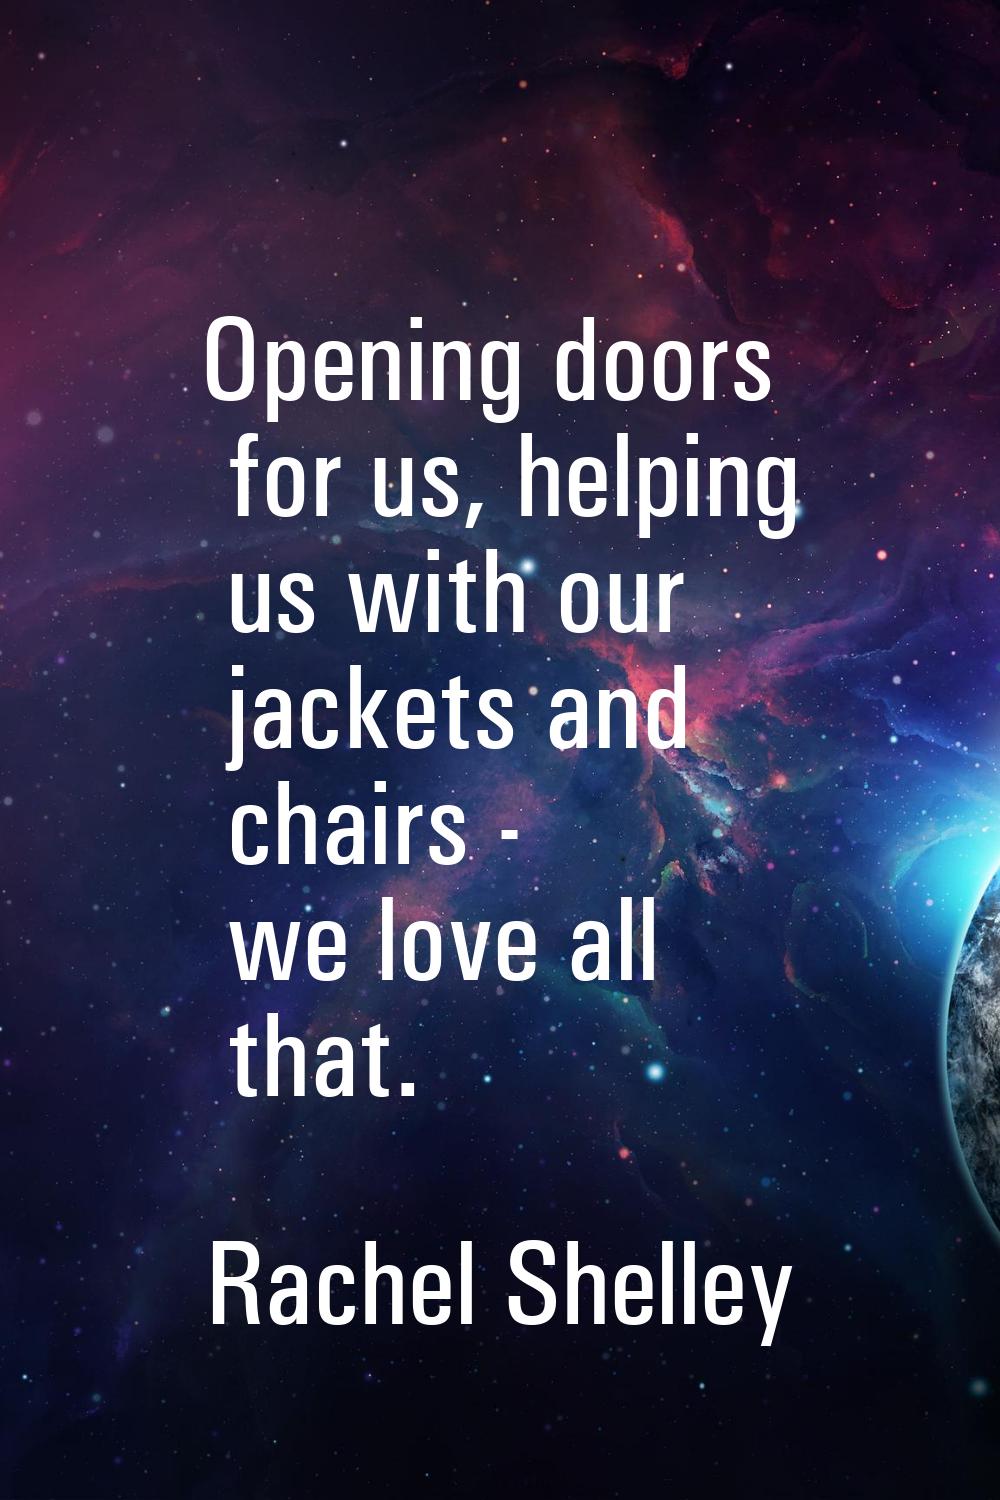 Opening doors for us, helping us with our jackets and chairs - we love all that.